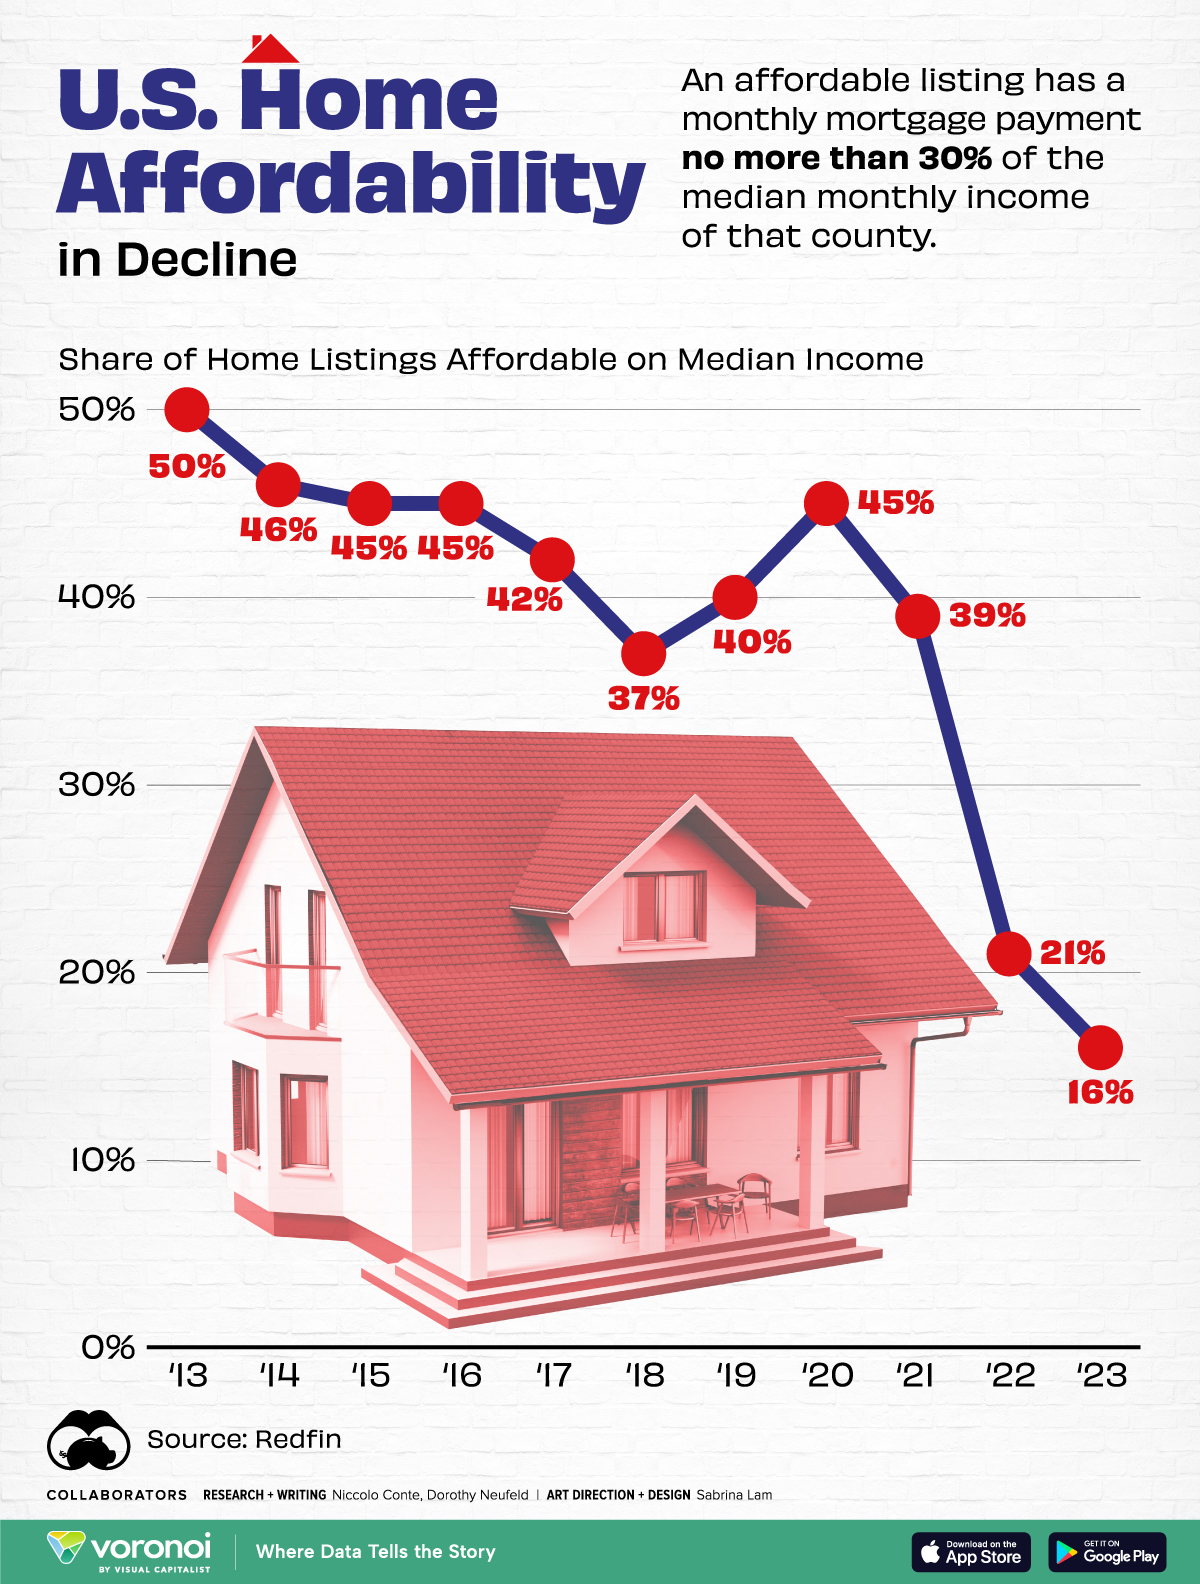 This line chart shows the share of affordable homes in America.